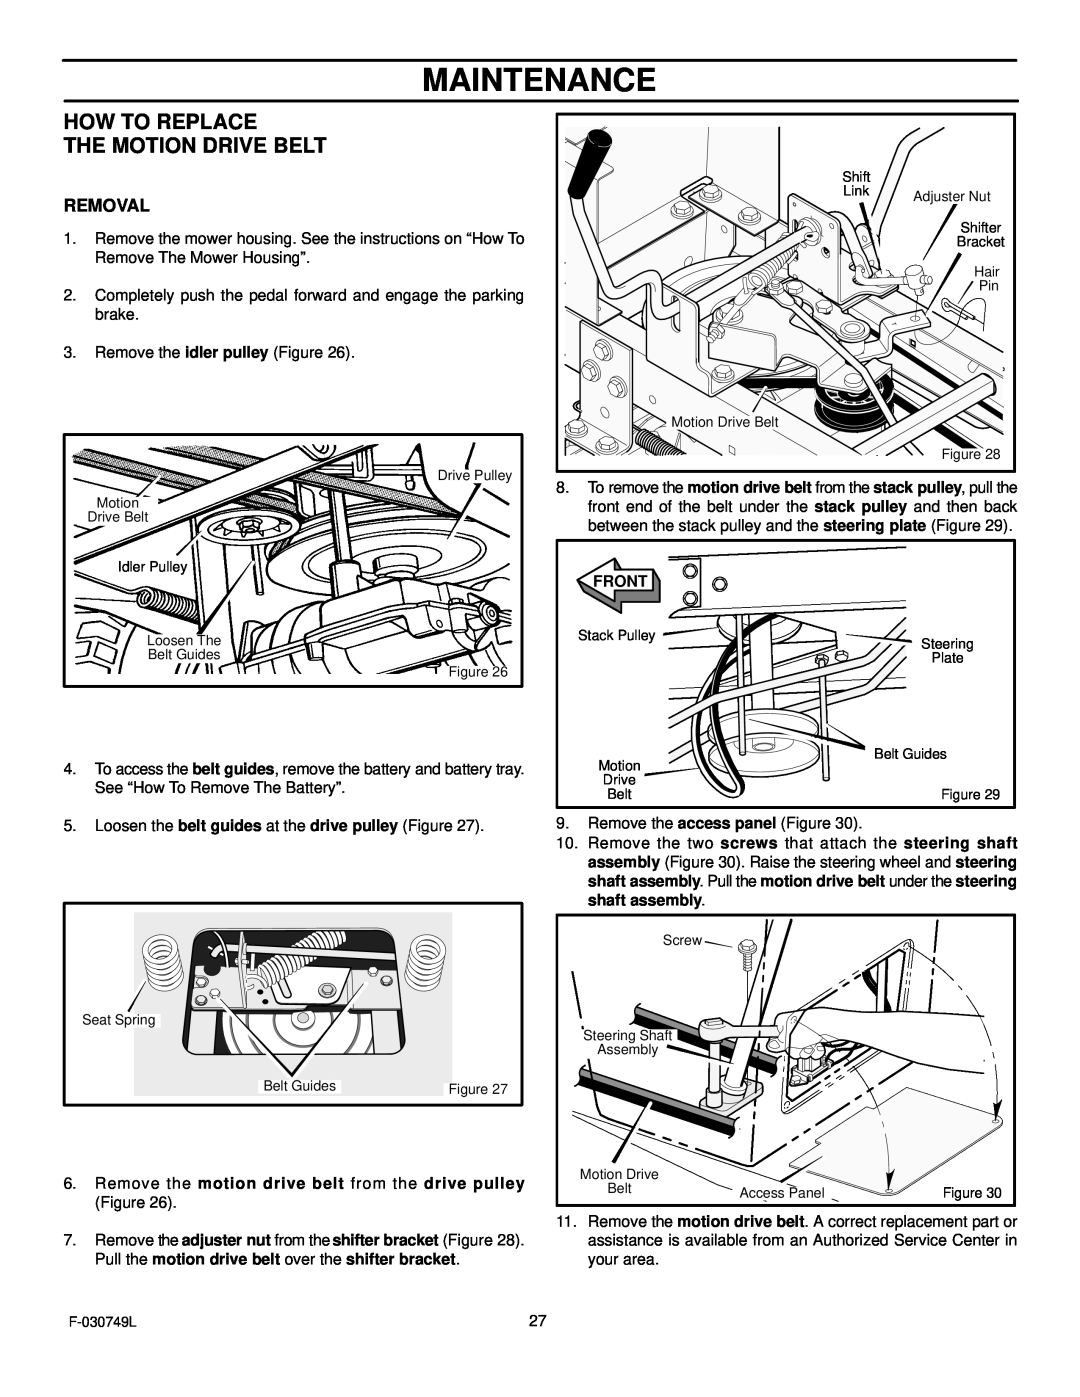 Murray 405030x48A manual Maintenance, How To Replace The Motion Drive Belt, Removal 